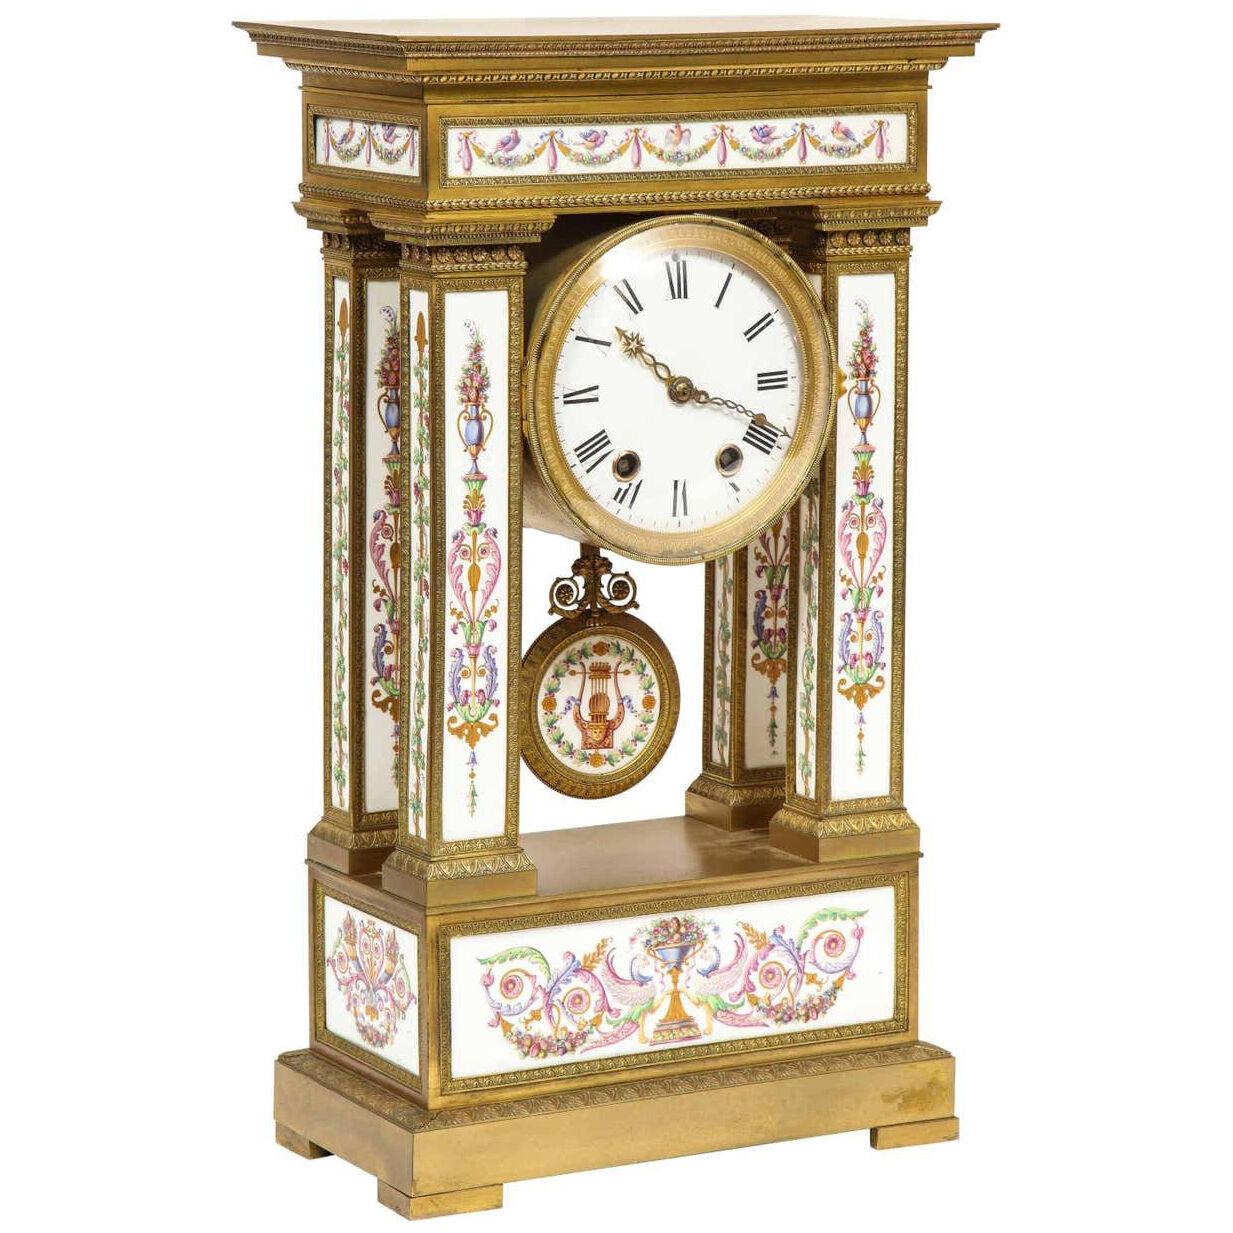 A Rare and Exquisite French Ormolu and Porcelain Clock, attributed to Deniere